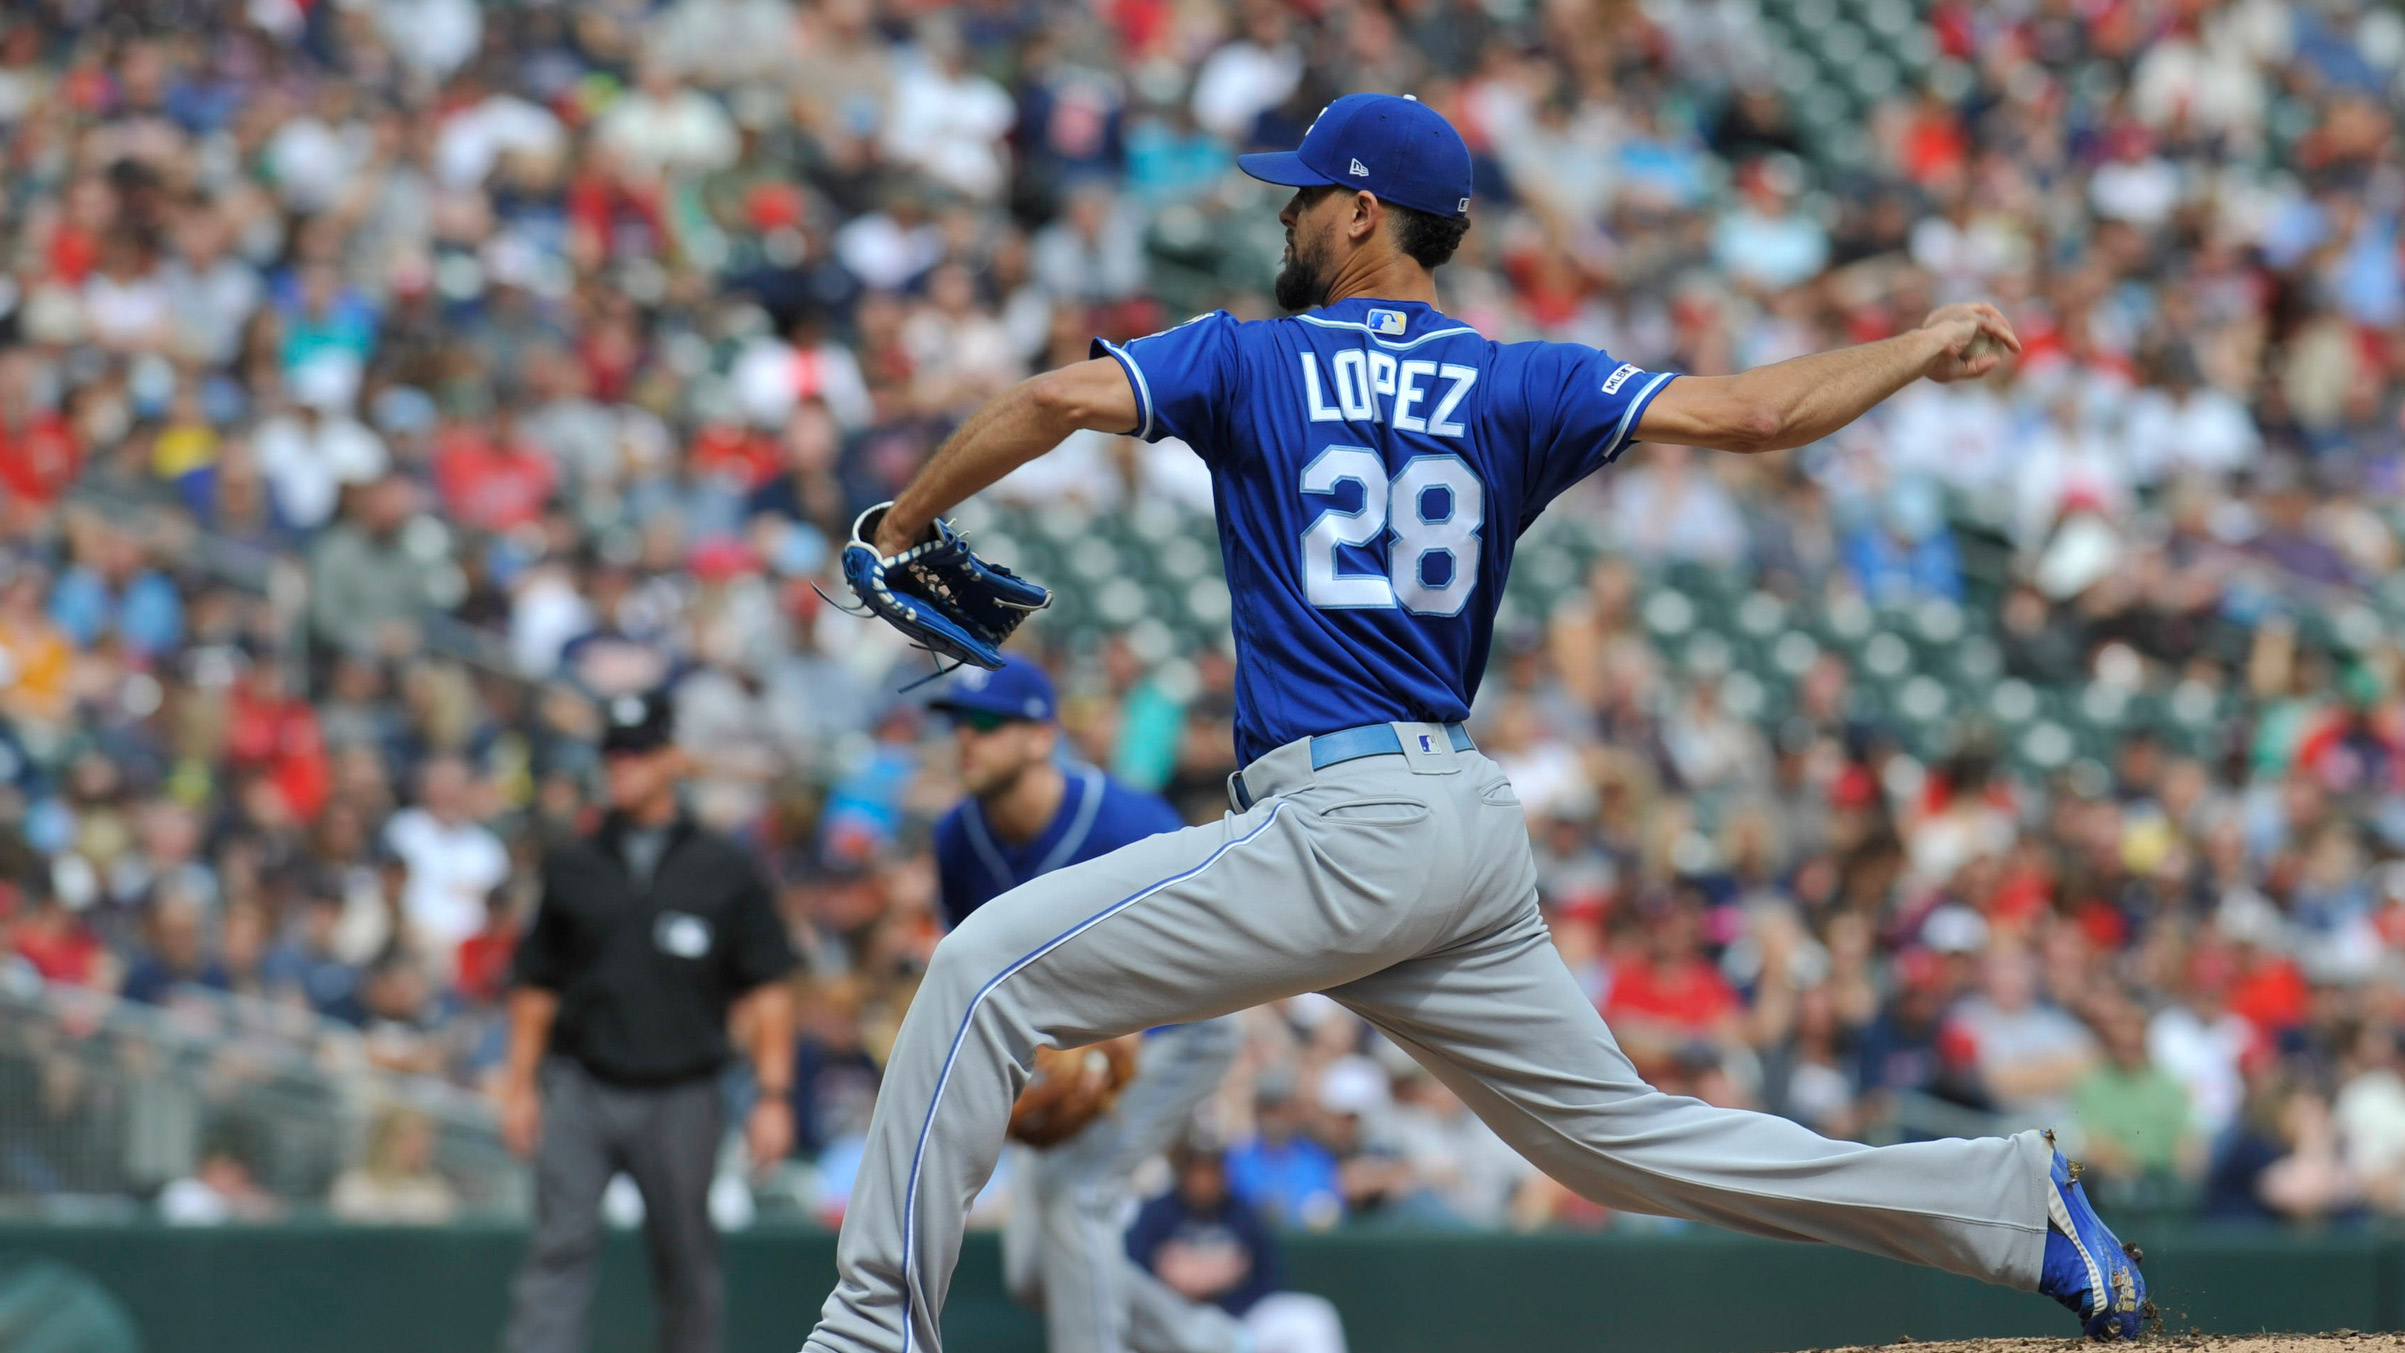 Royals' pitching overmatched by Twins' bats in 12-8 loss